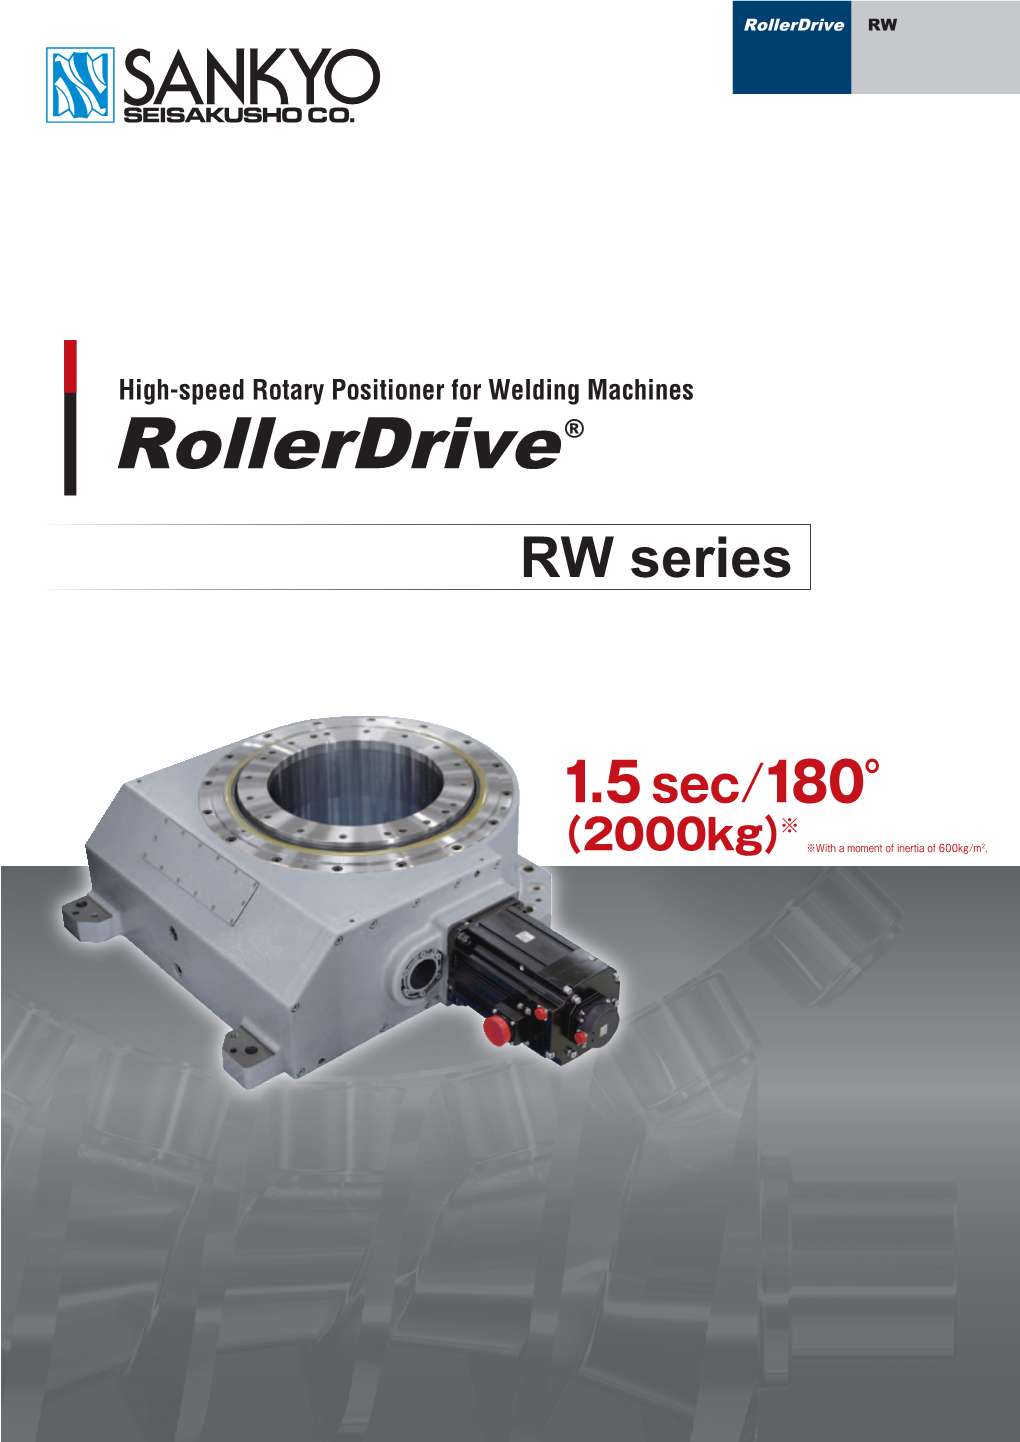 Rollerdrive RW Series Is a Positioner for Welding Machines